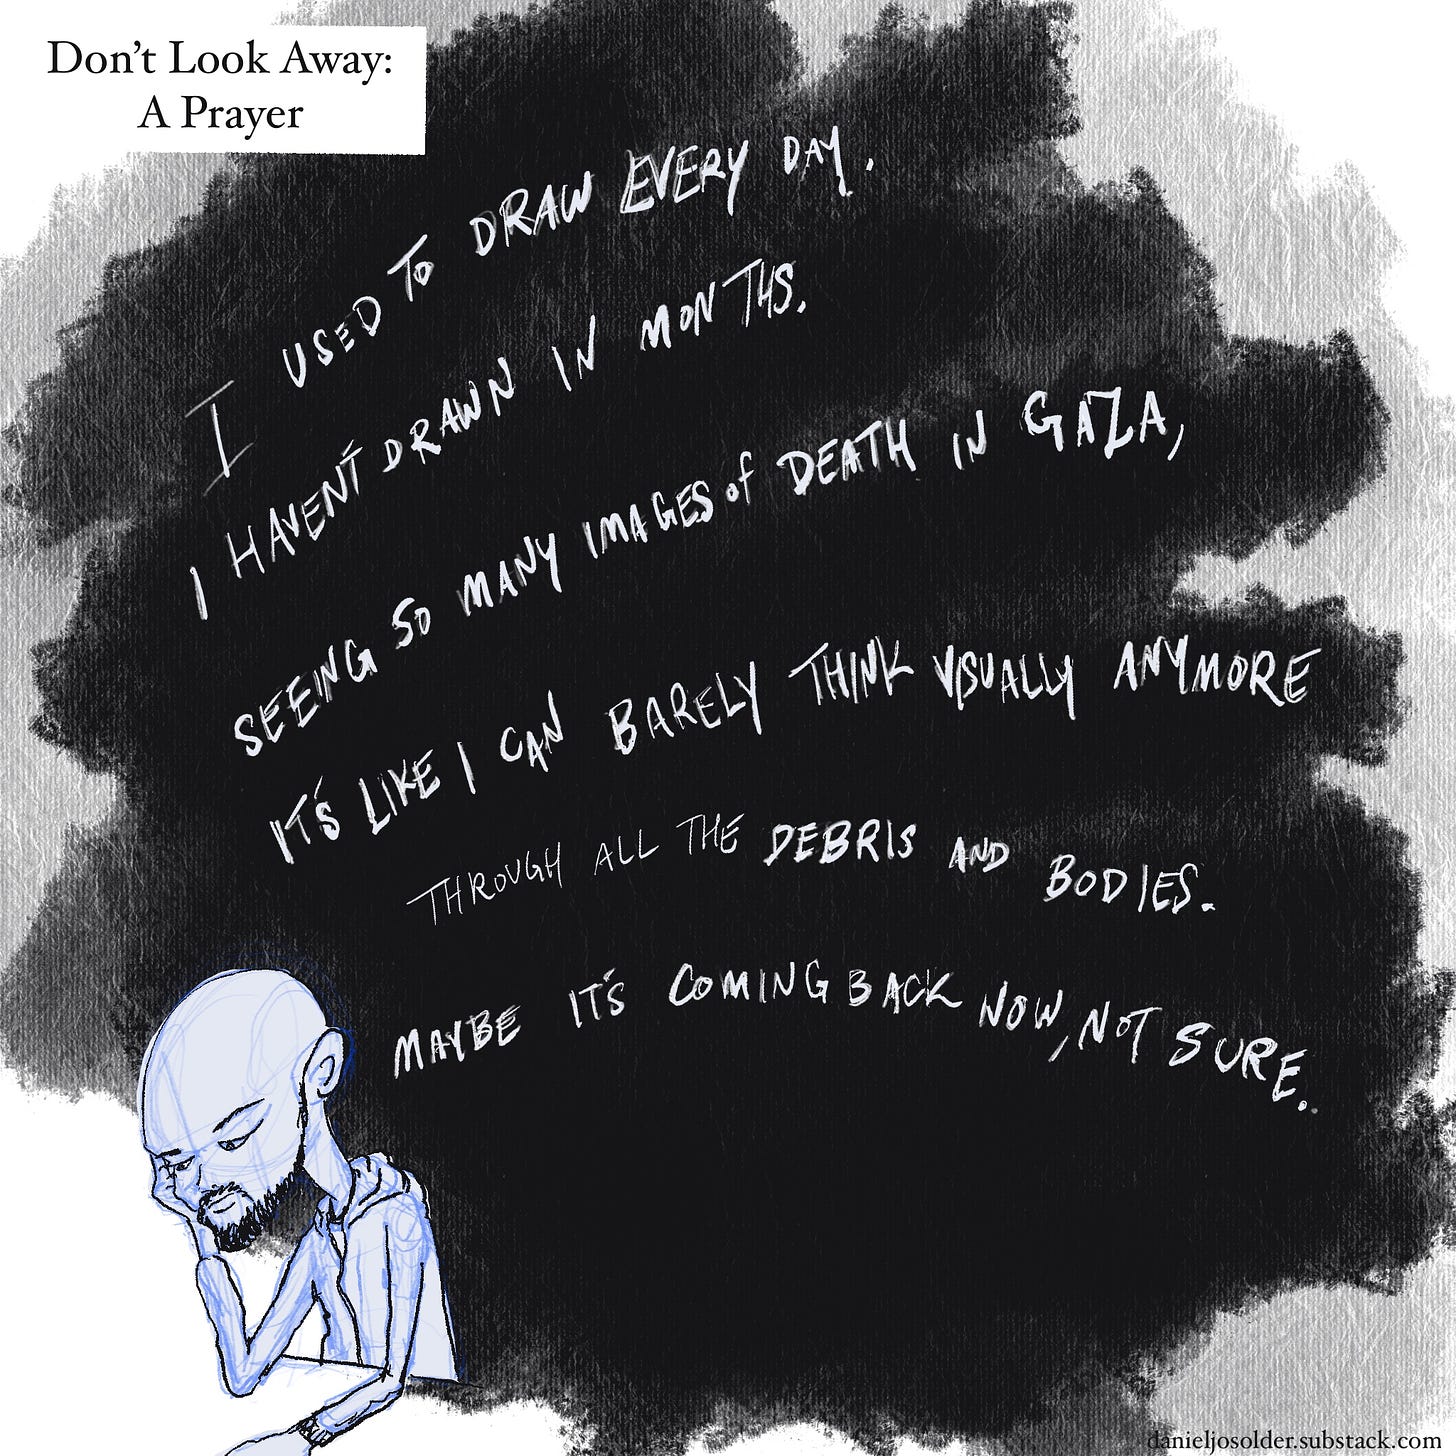 Don't look away: A Prayer. I used to draw every day. I haven't drawn in months. Seeing so many images of death in Gaza, it's like I can barely think visually anymore through all the debris and bodies. Maybe it's coming back now, not sure. Image description: The words are written in white ink inside of a black cloud. a drawing of Daniel is looking down in the corner.